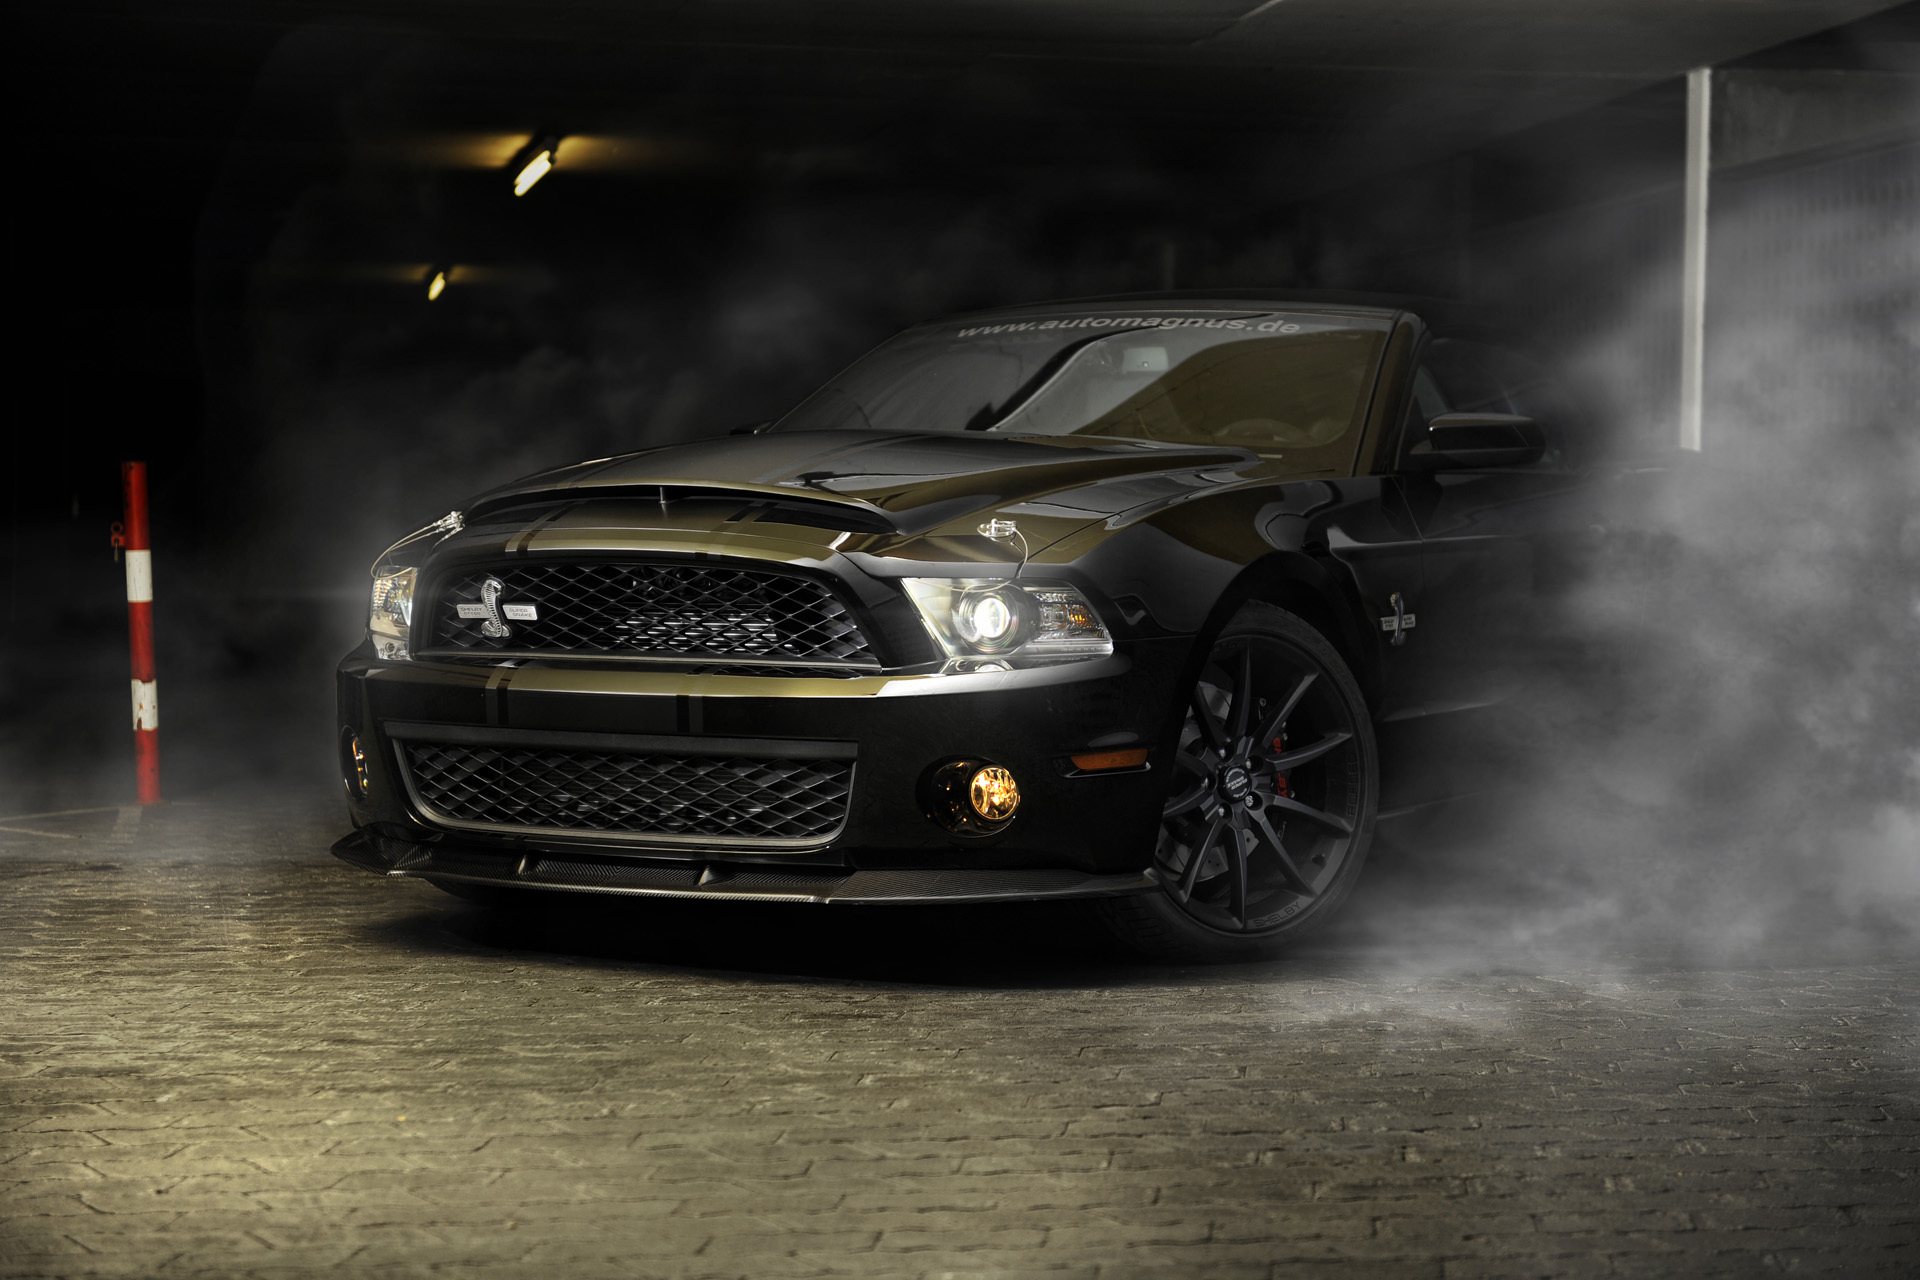 New Lock Screen Wallpapers ford, ford mustang, vehicles